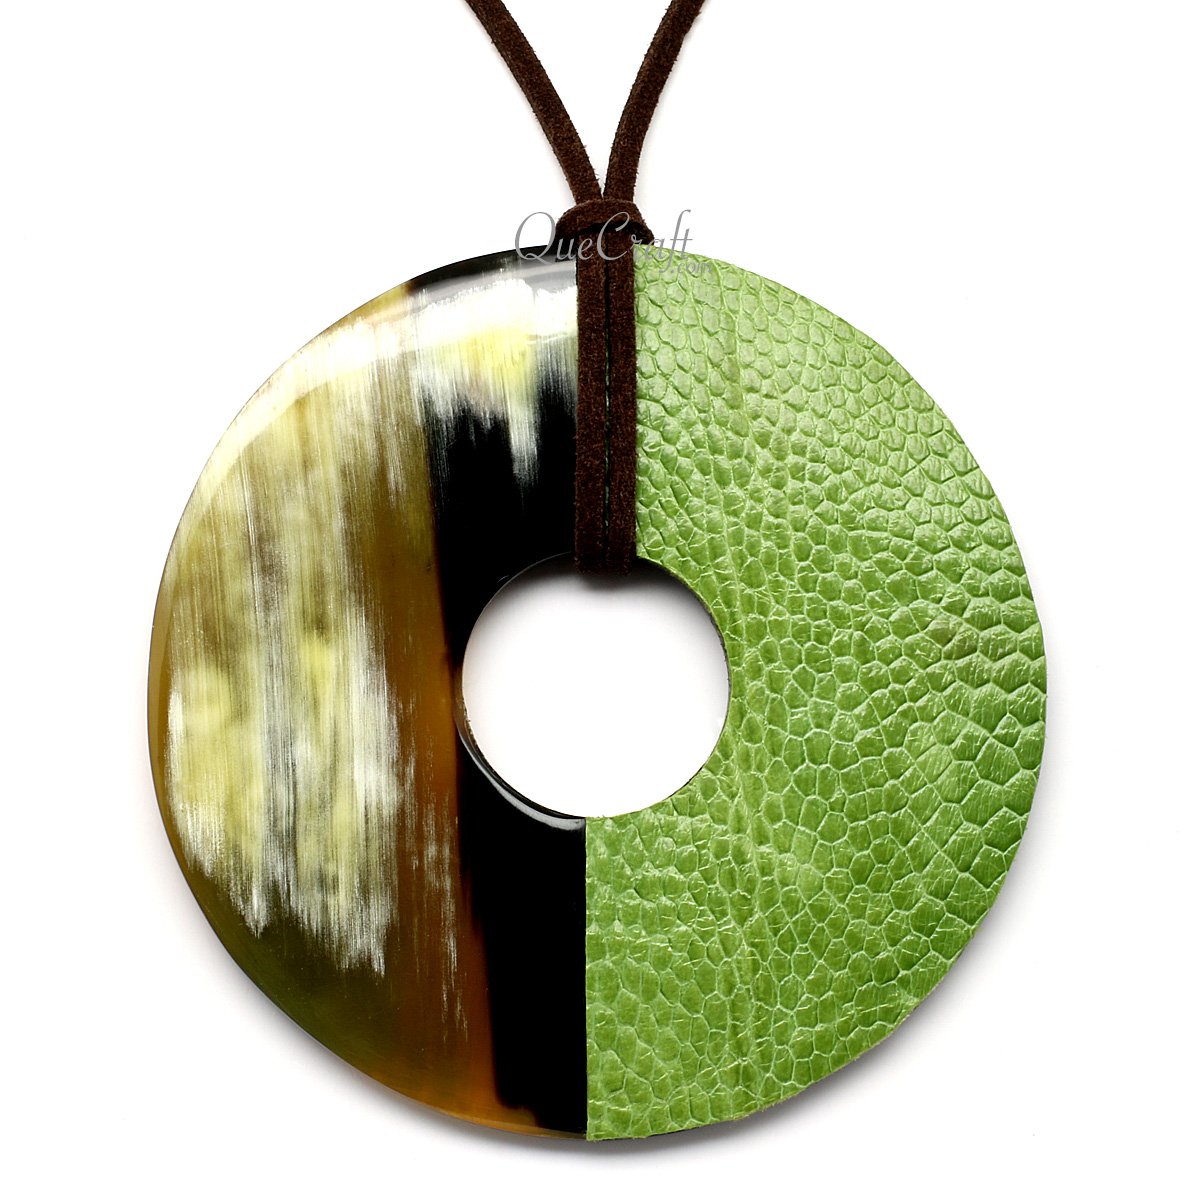 Horn & Leather Pendant #12483 - HORN JEWELRY